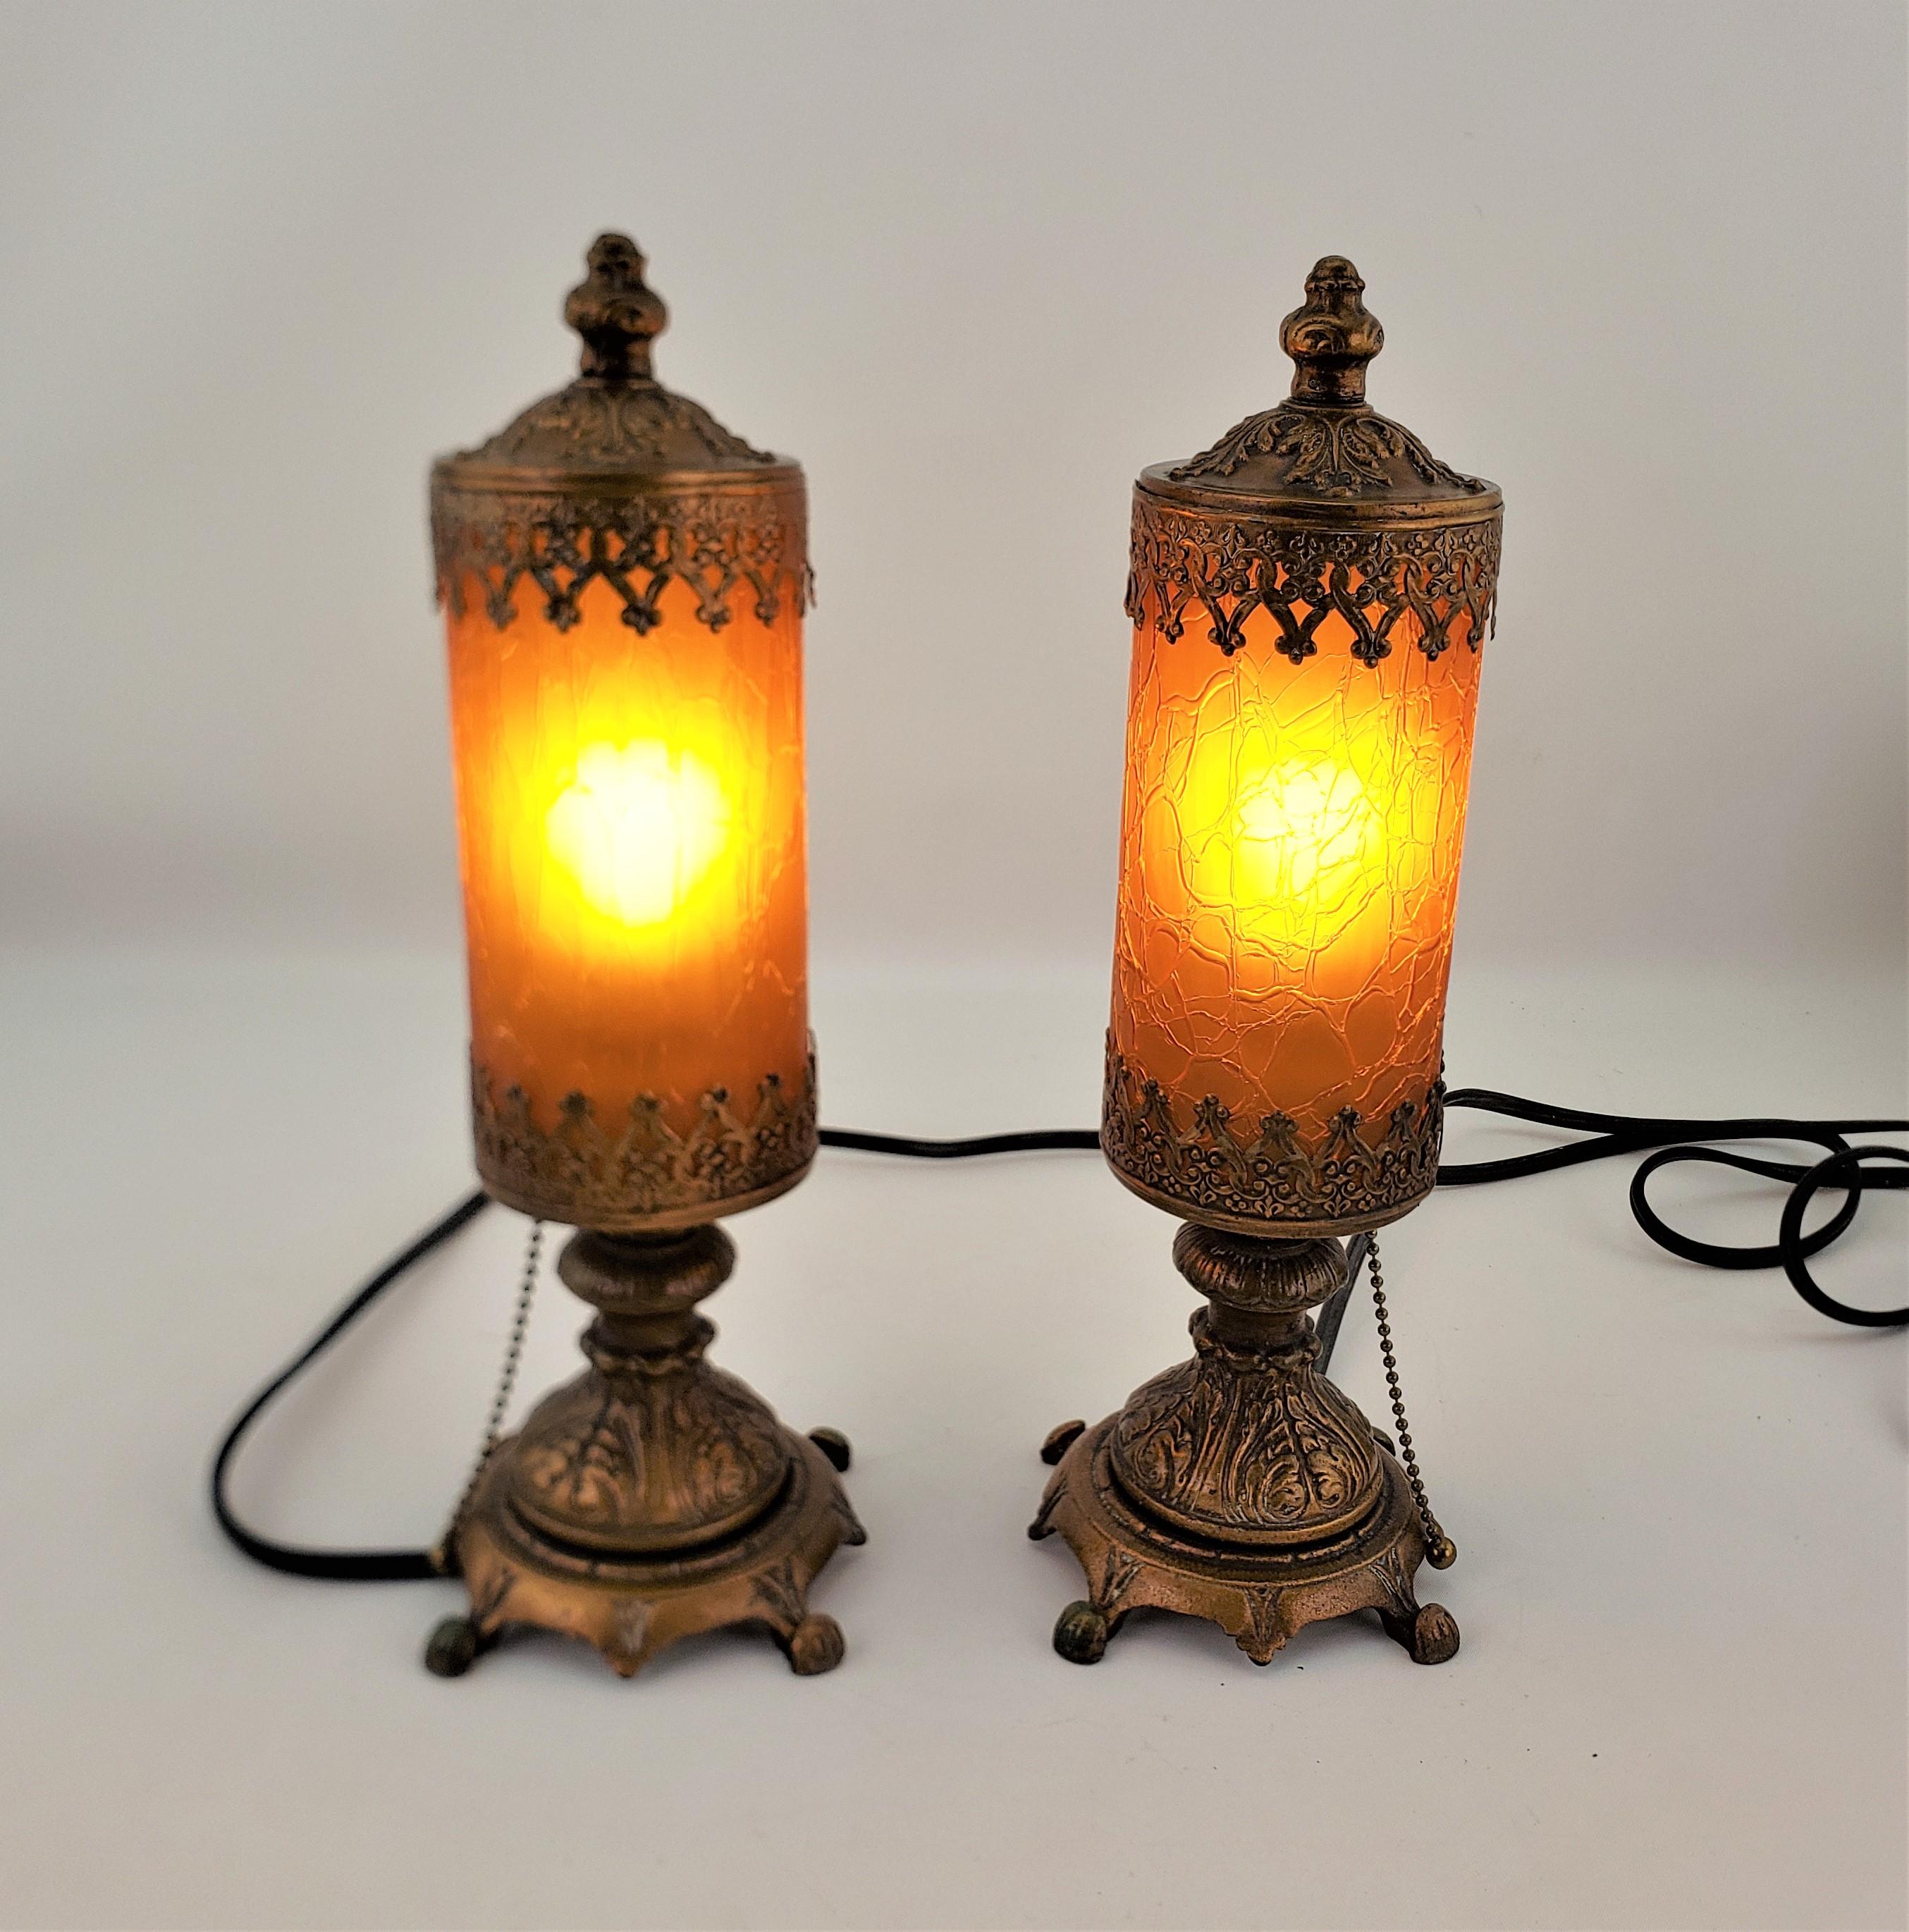 This pair of amber crackle glass accent or boudoir lamps are unsigned, but presumed to have been made in the United States in approximately 1920 in a Victorian period style. The lamps are composed of pressed and patinated metal with ornately